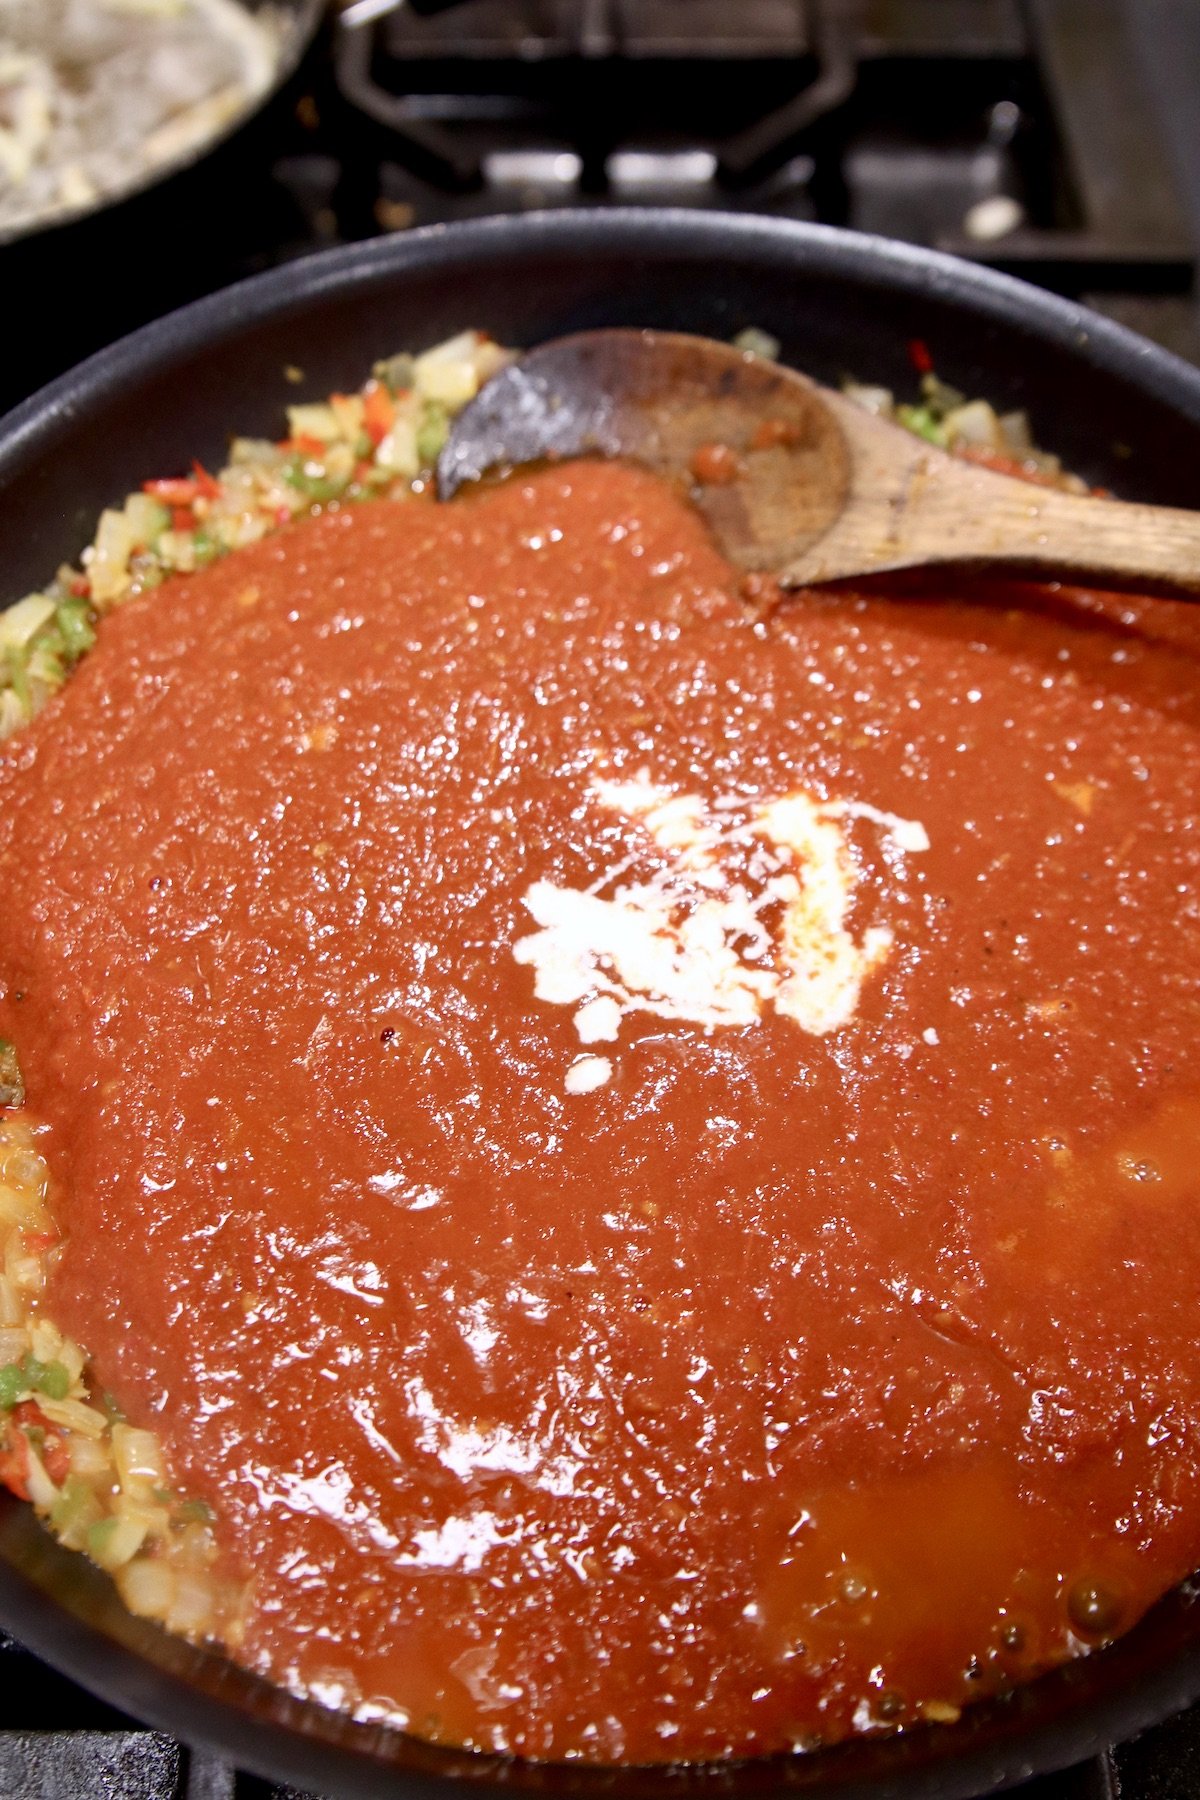 tomato sauce and heavy cream added to a skillet of cooked onions and peppers